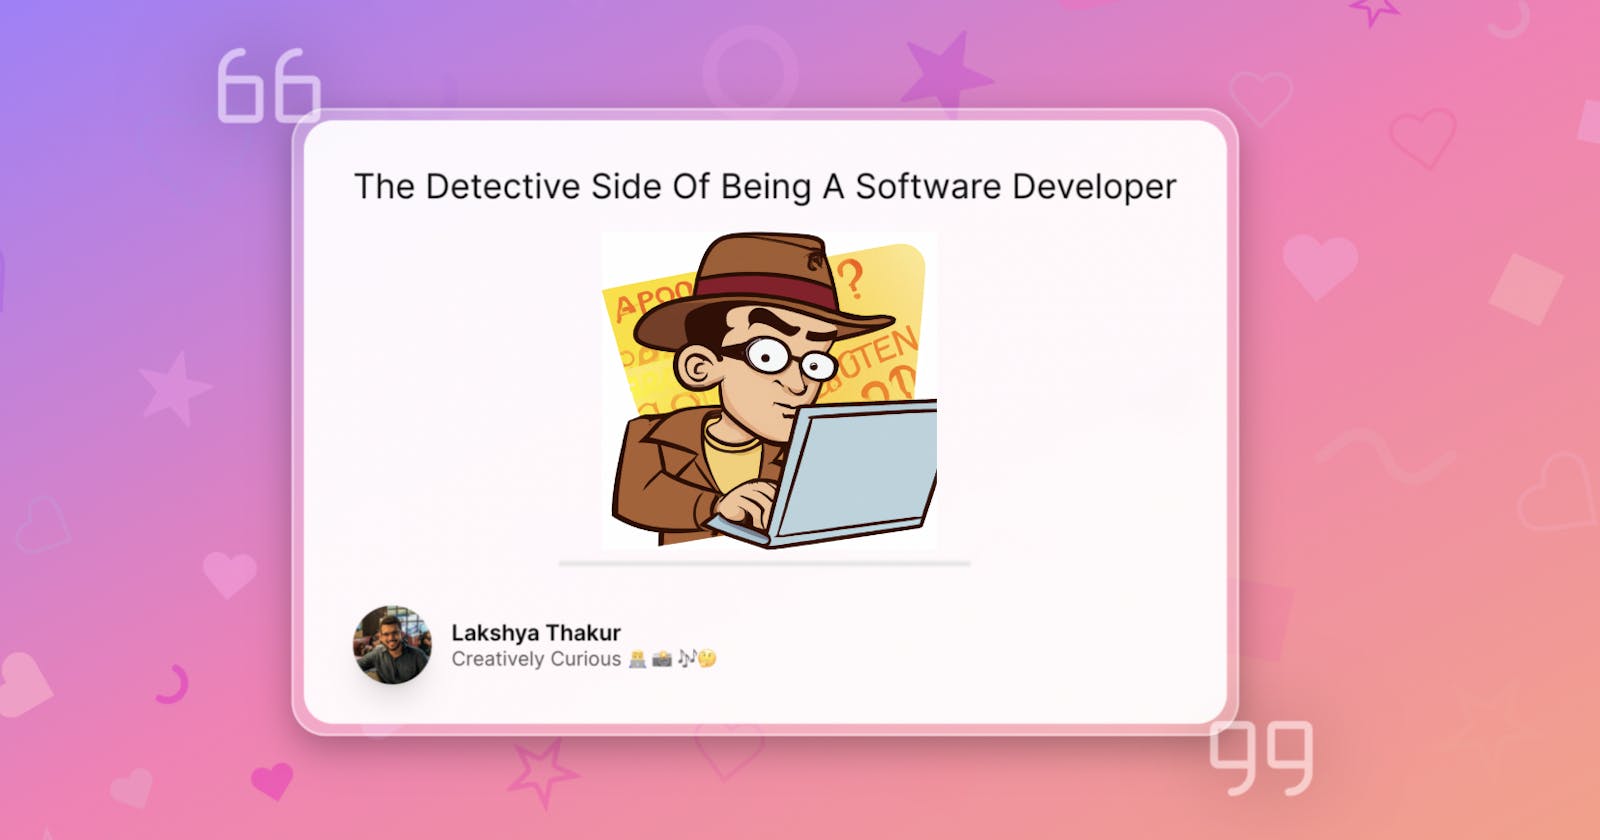 The Detective Side Of Being A Software Developer